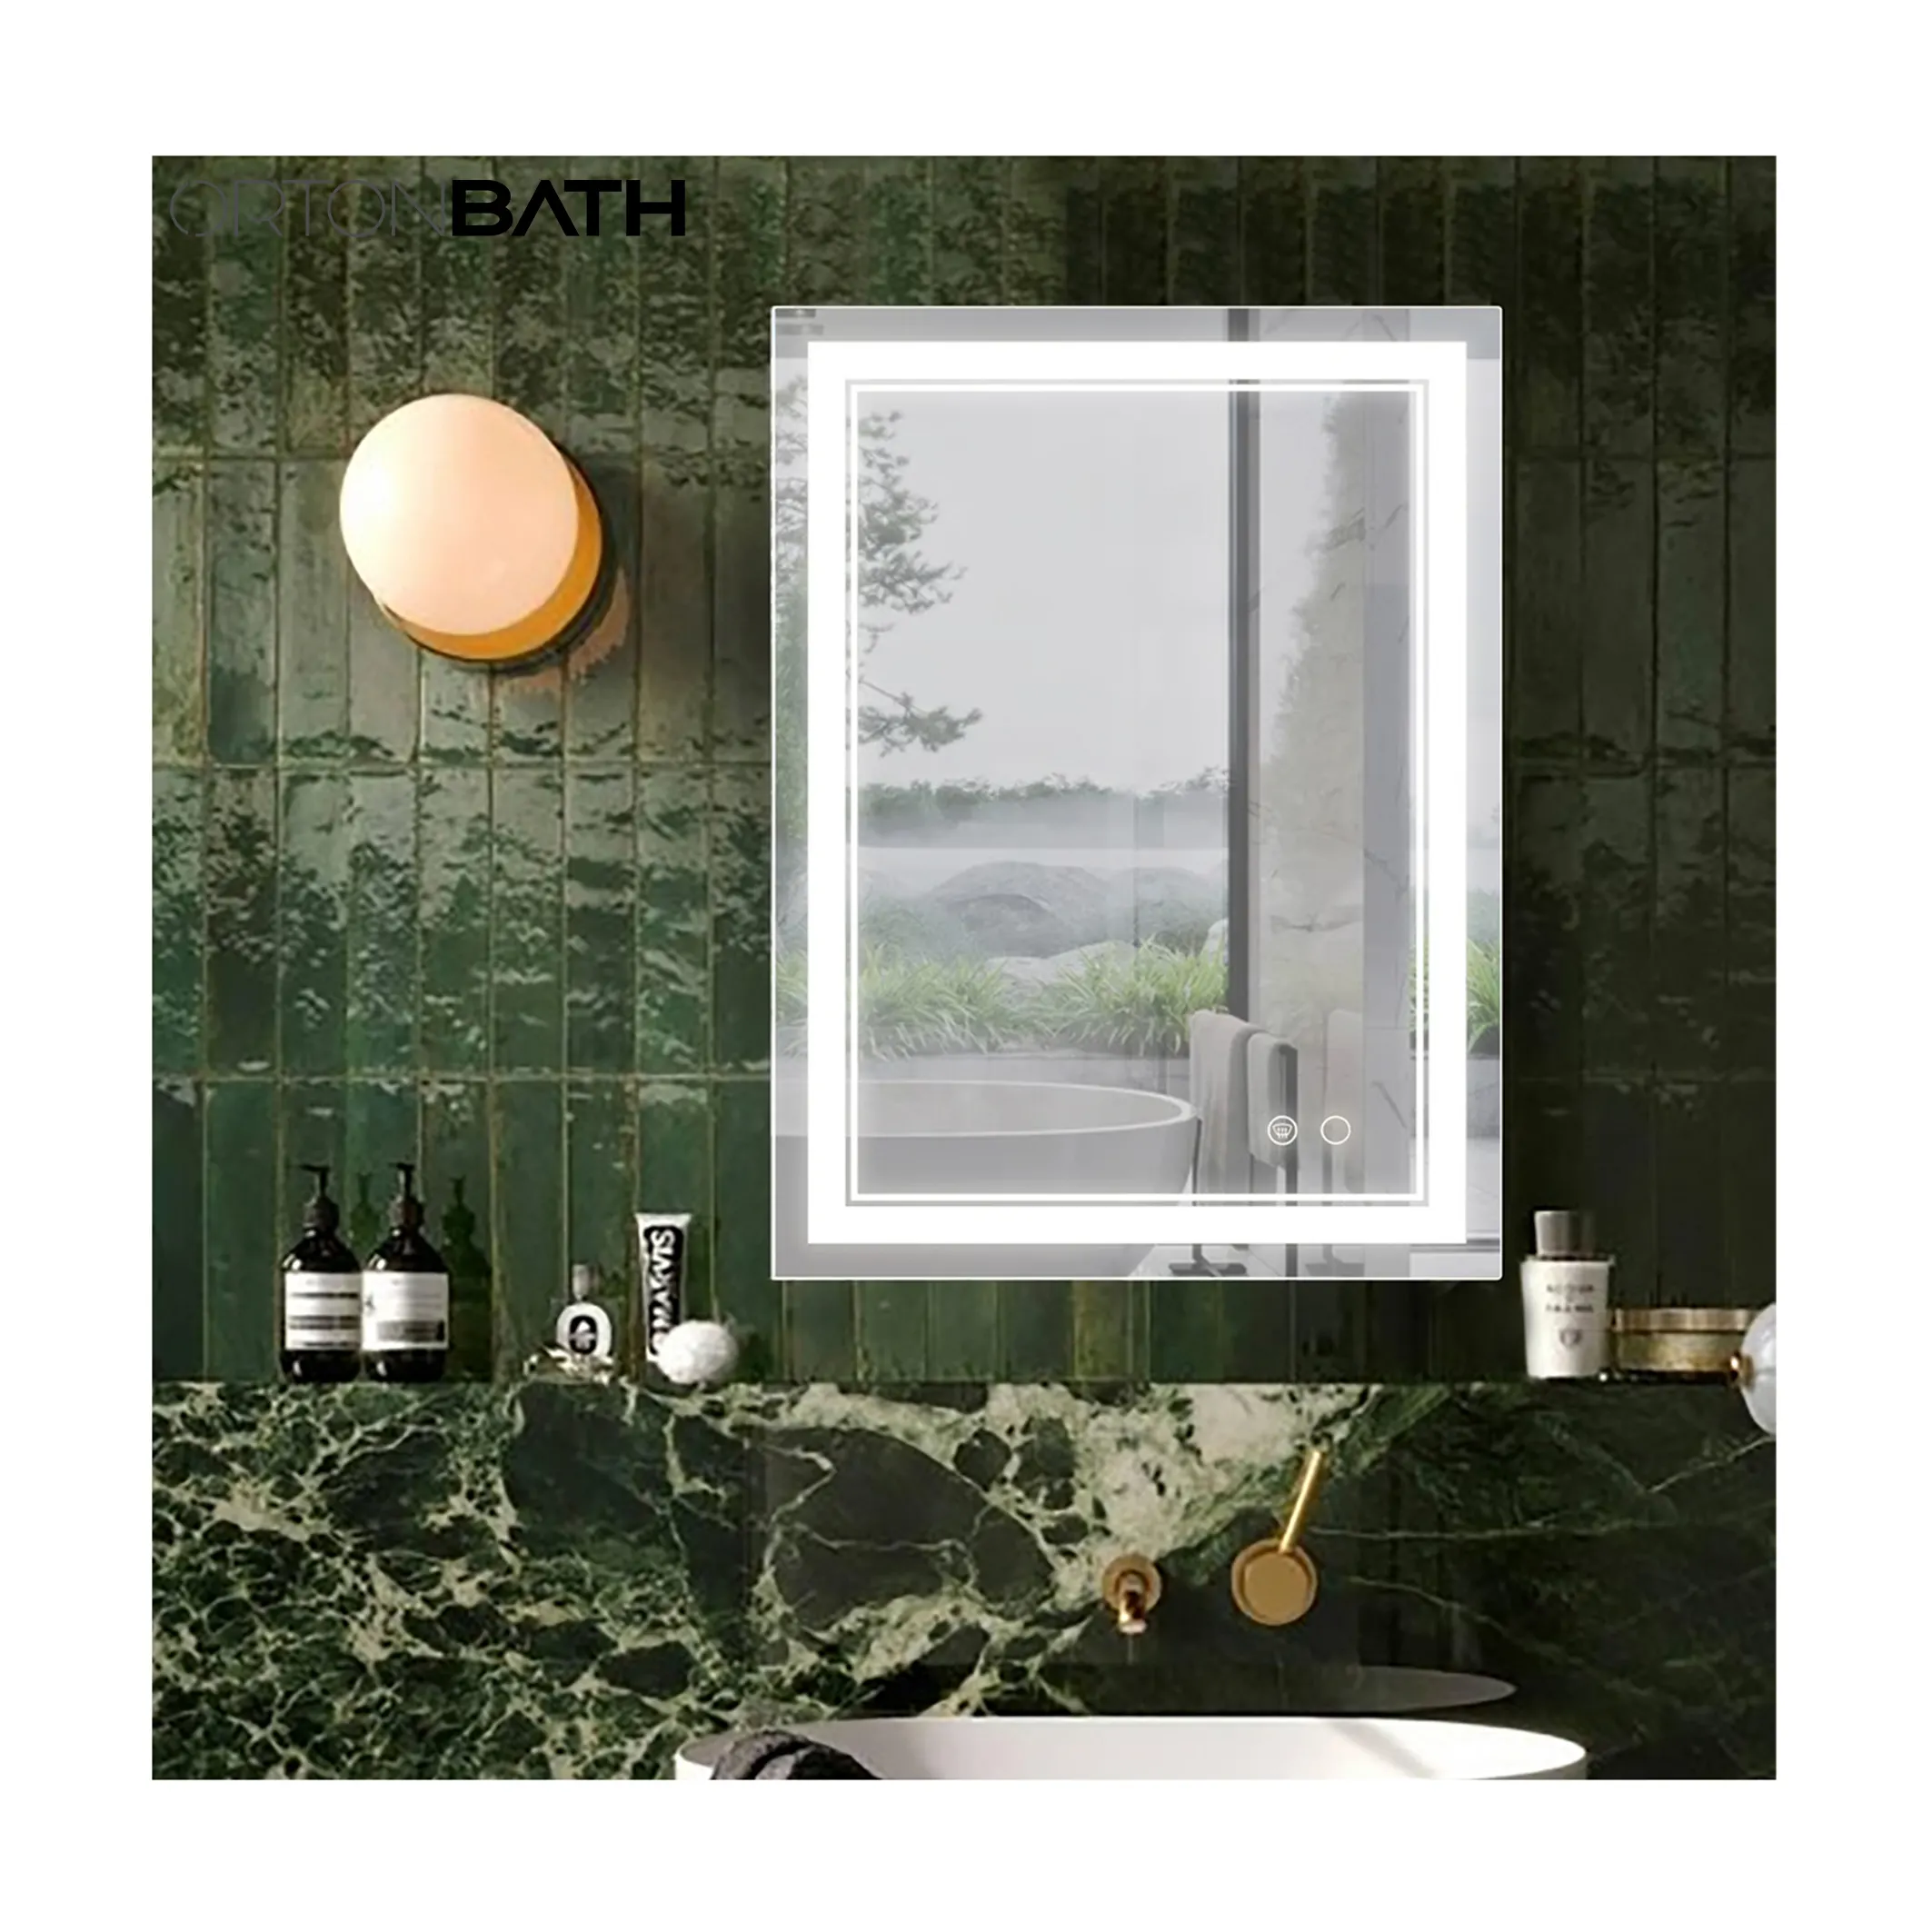 ORTONBATH LED Bathroom Mirror with Front and Back Light 3 Color Dimmable Wall Mounted Bathroom Mirror Lights Waterproof